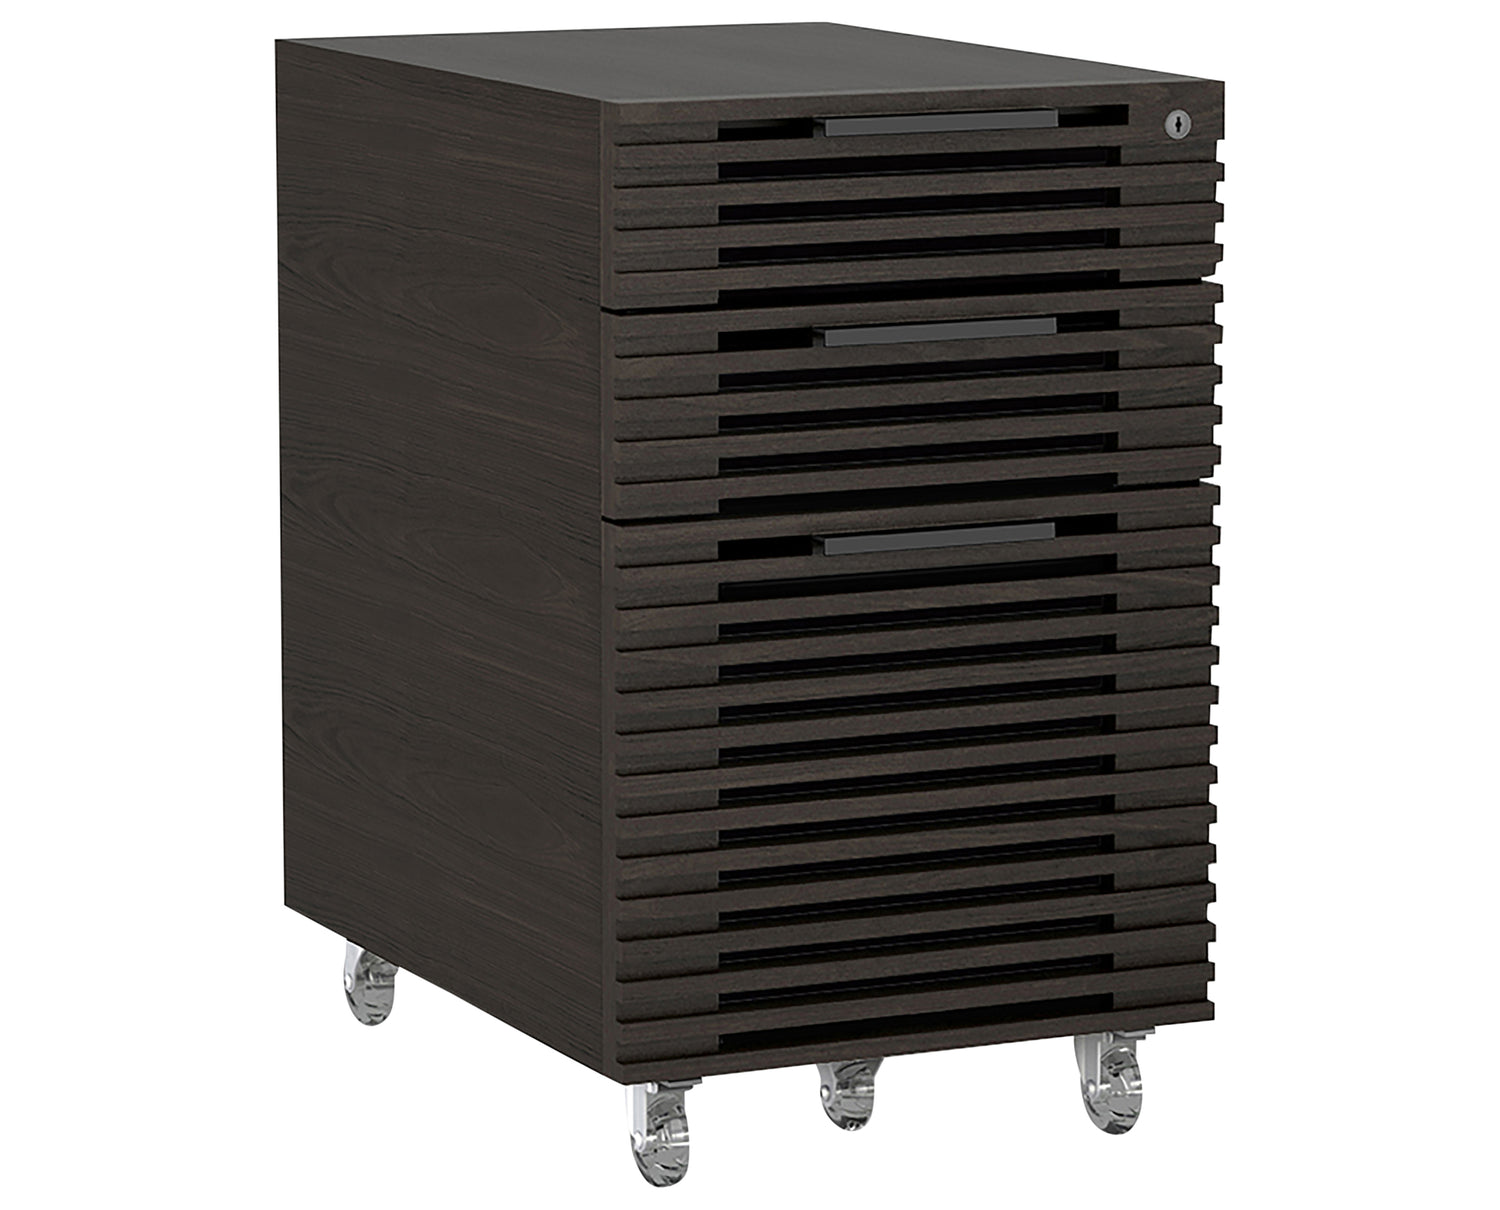 Charcoal Stained Ash & Charcoal Ash Veneer with Black Steel | BDI Corridor Mobile FIle Cabinet | Valley Ridge Furniture